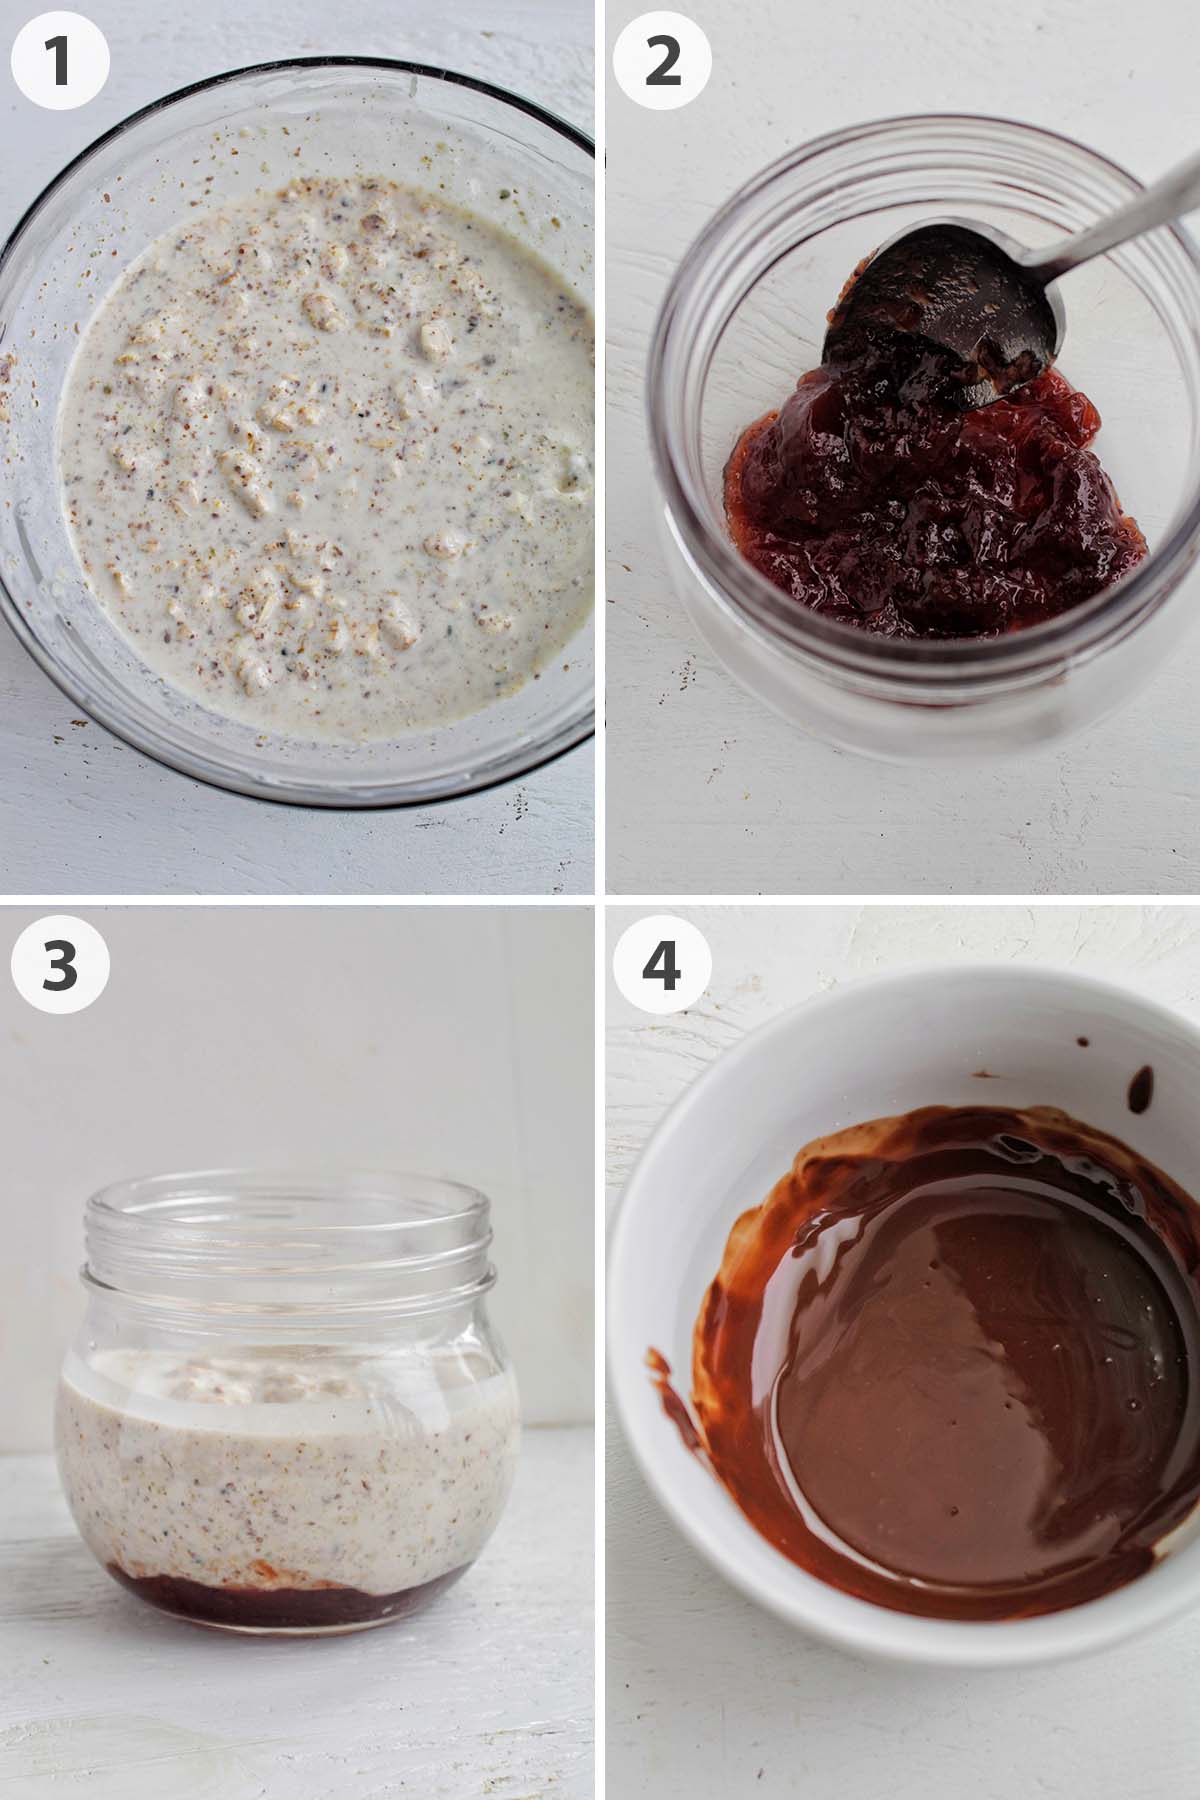 four numbered photos showing how to make strawberry and chocolate overnight oats.